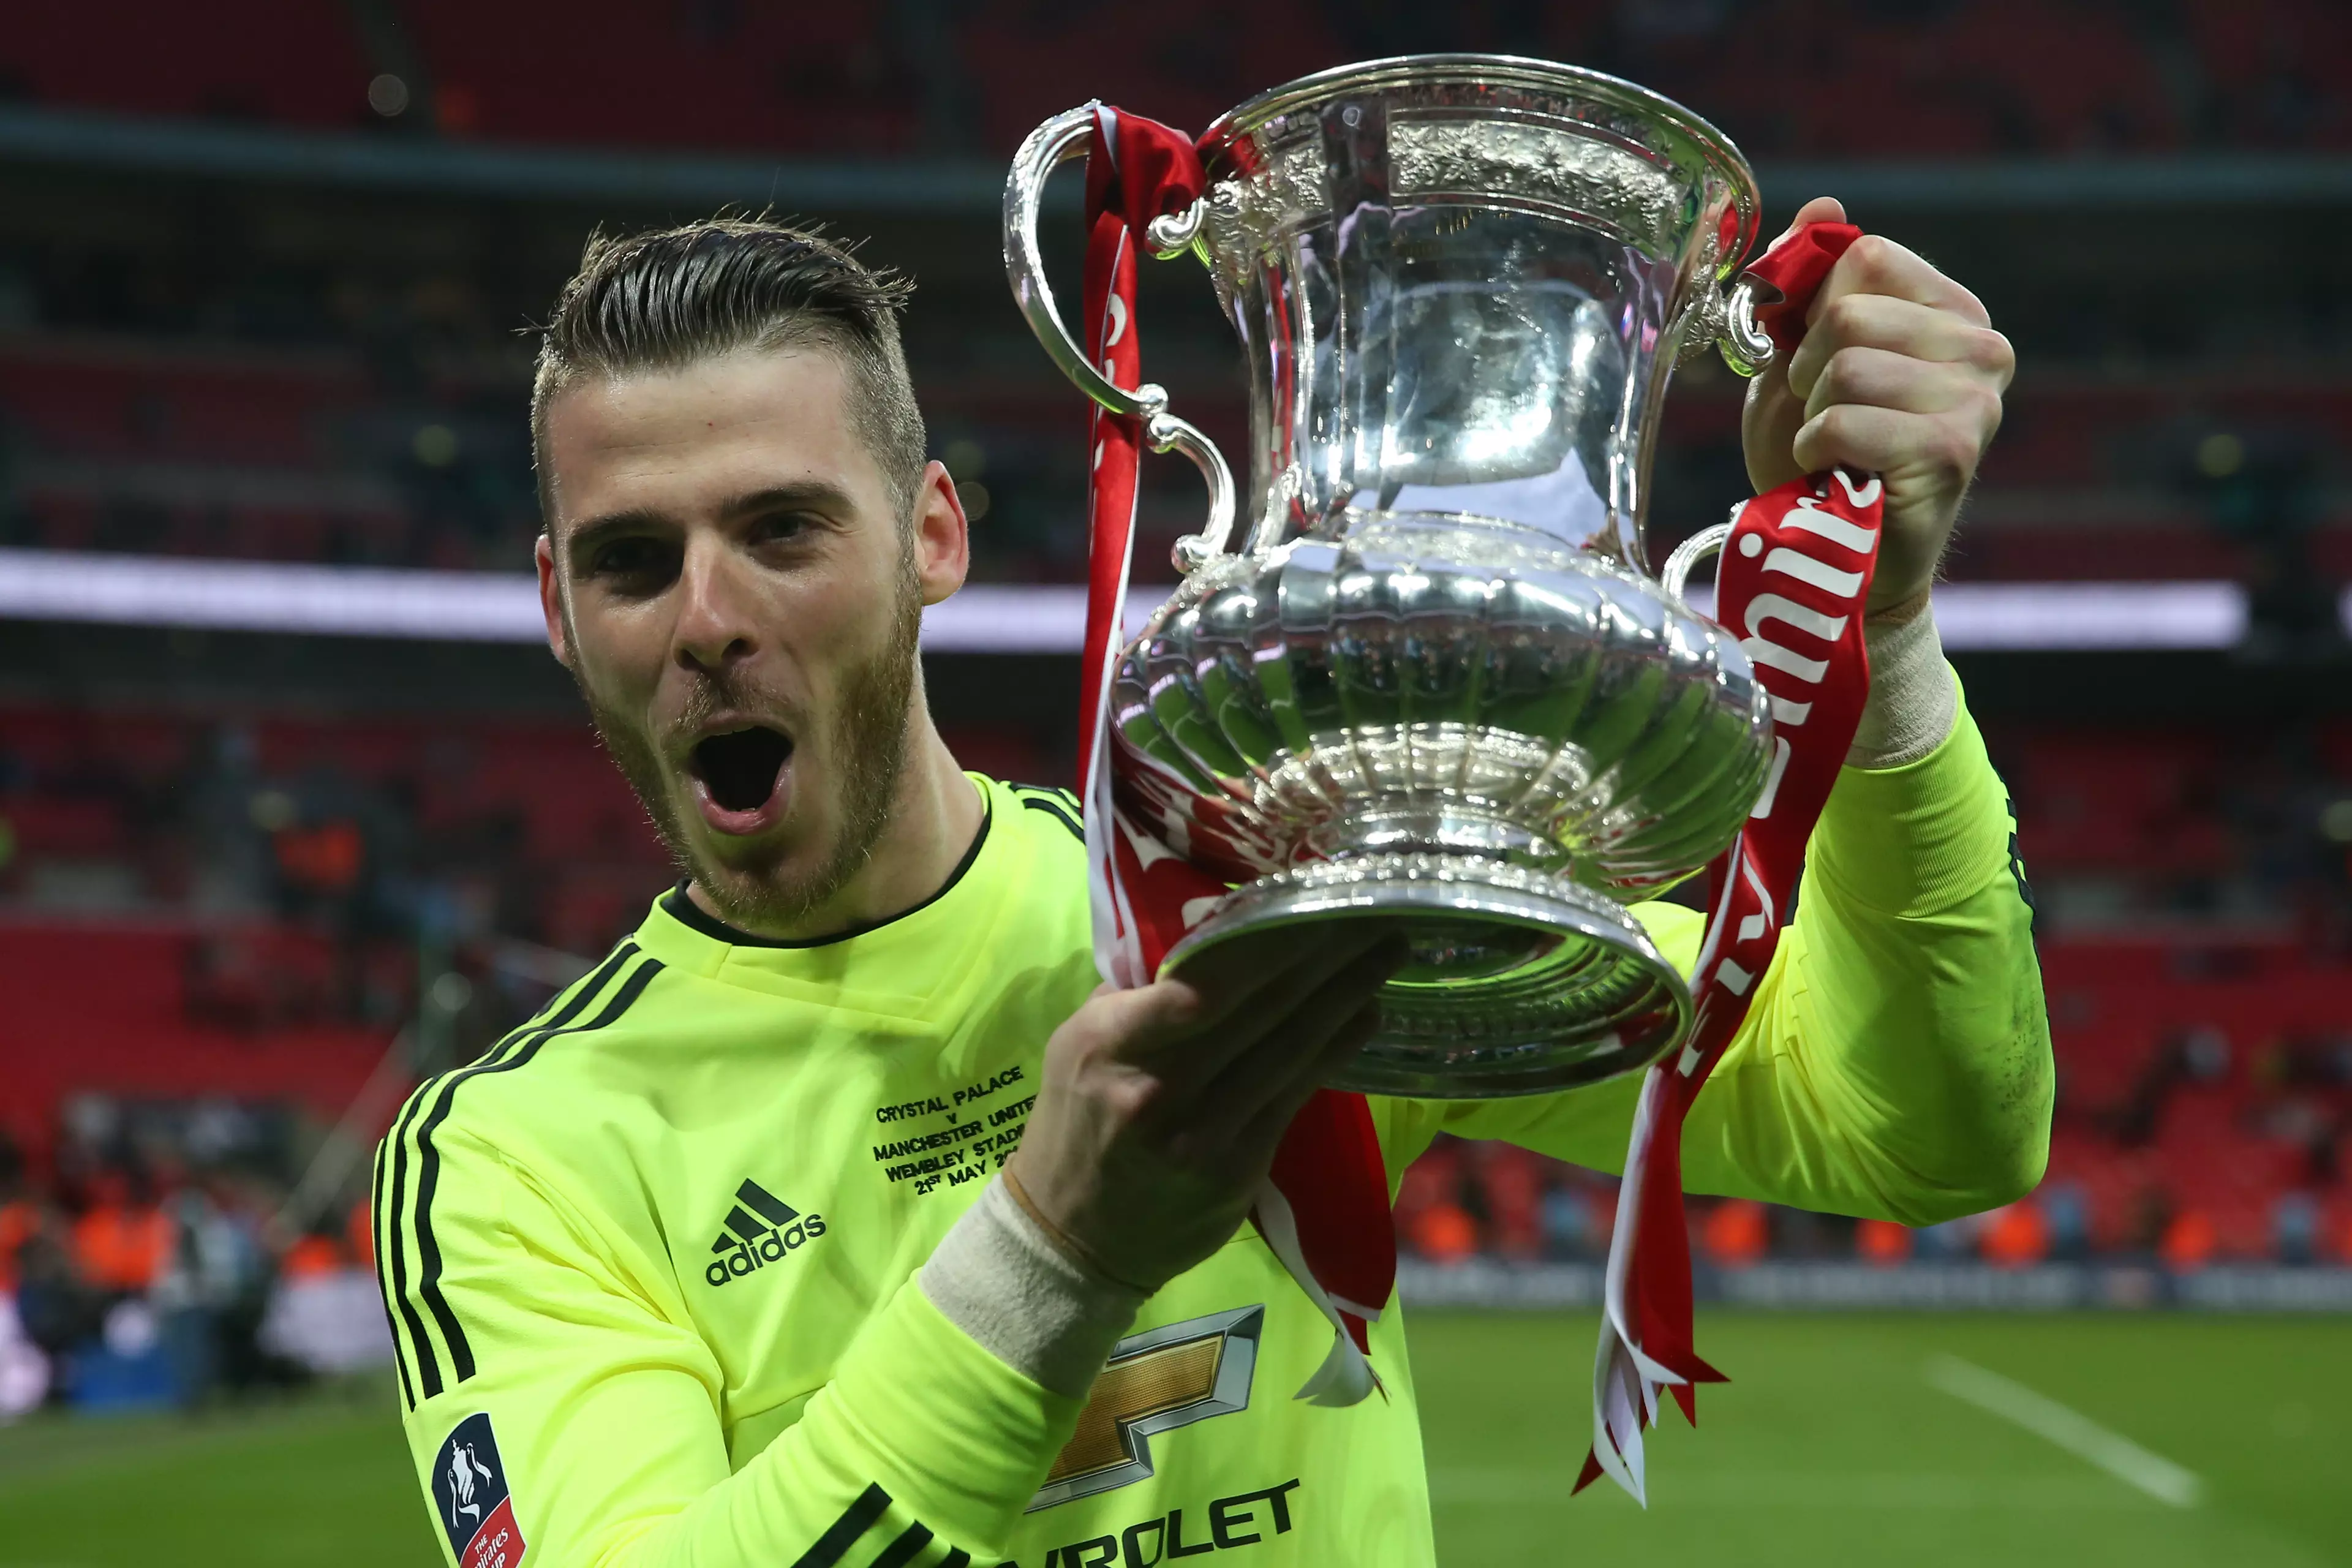 It's a sad indictment on United that De Gea's been so far ahead as their best player. Image: PA Images.